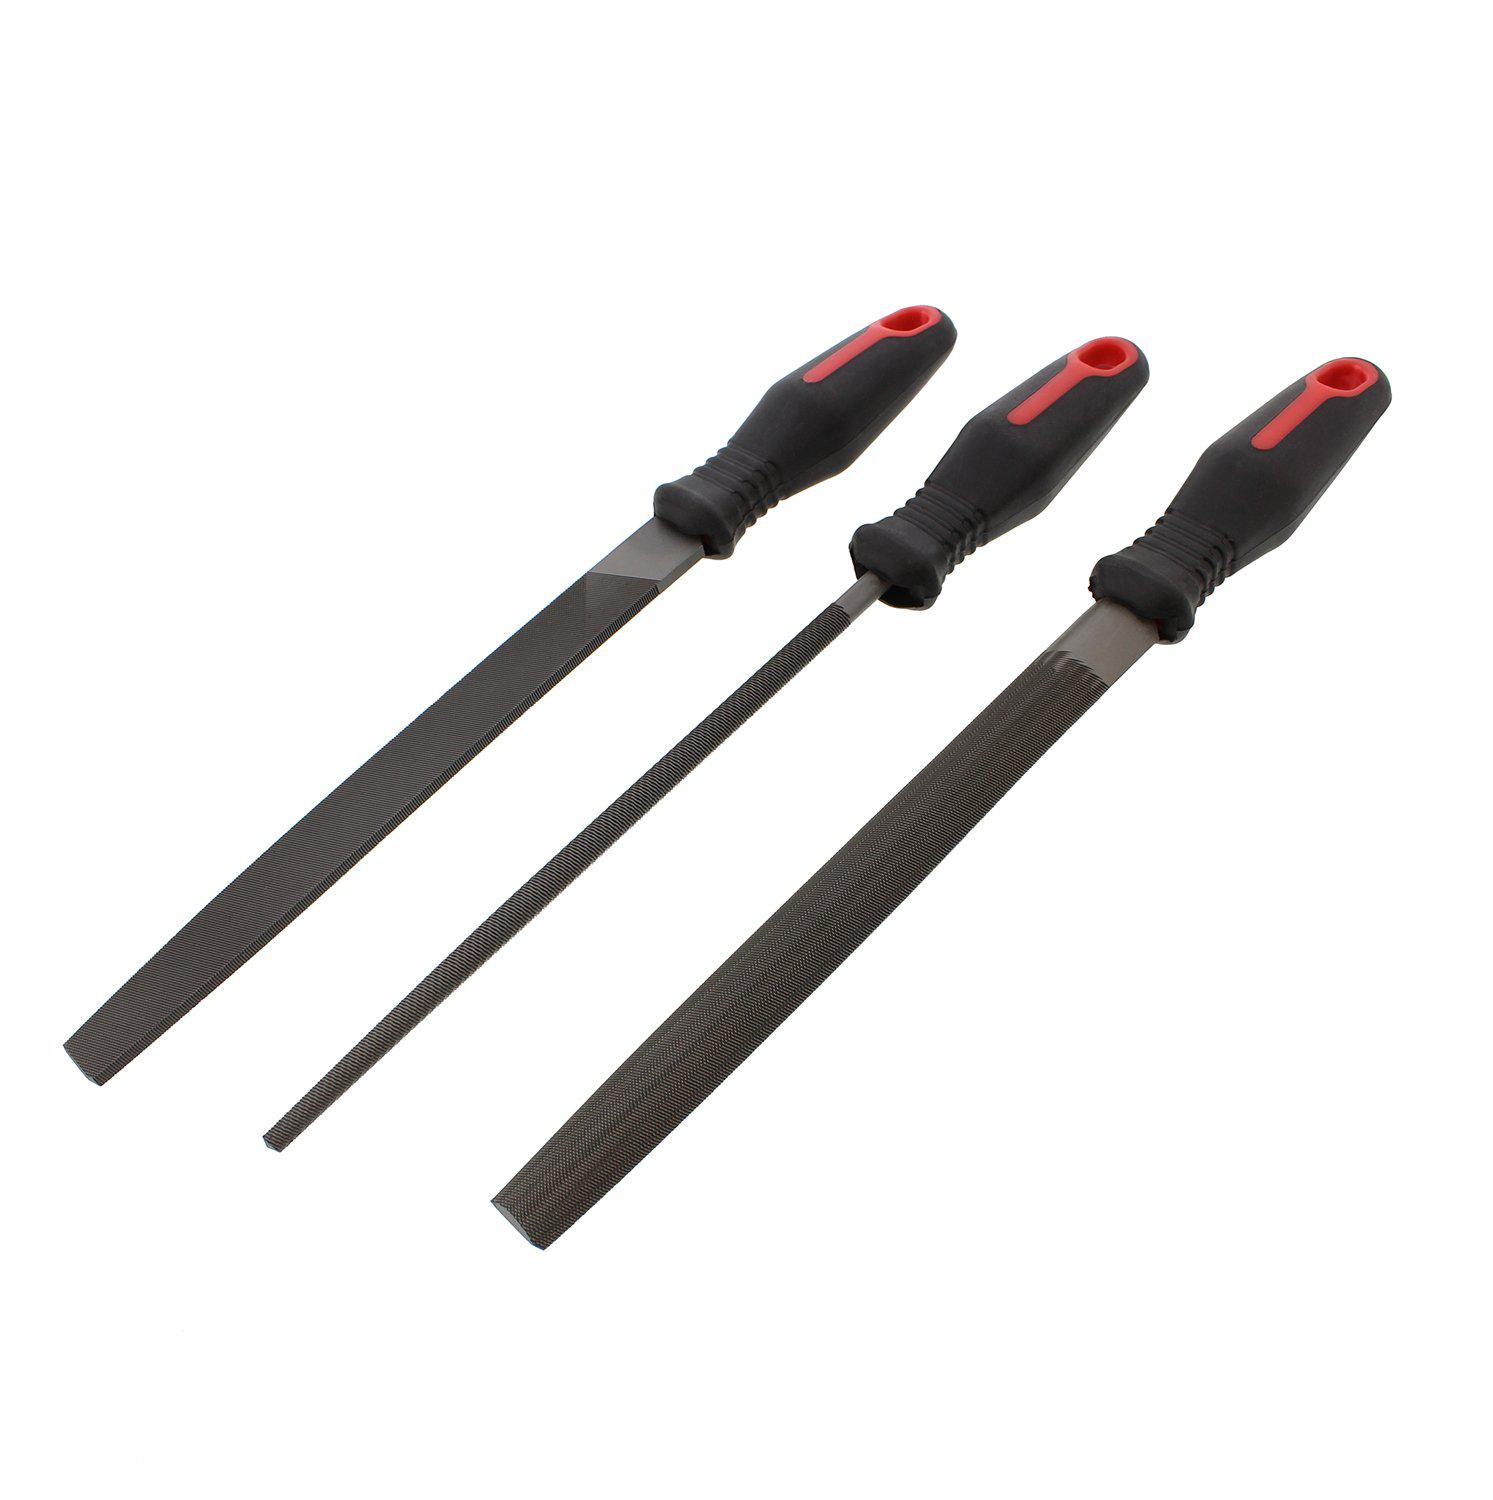 abn hand deburring file 3-piece set - deburr kit of large files for metal sharpening and wood hole shaping